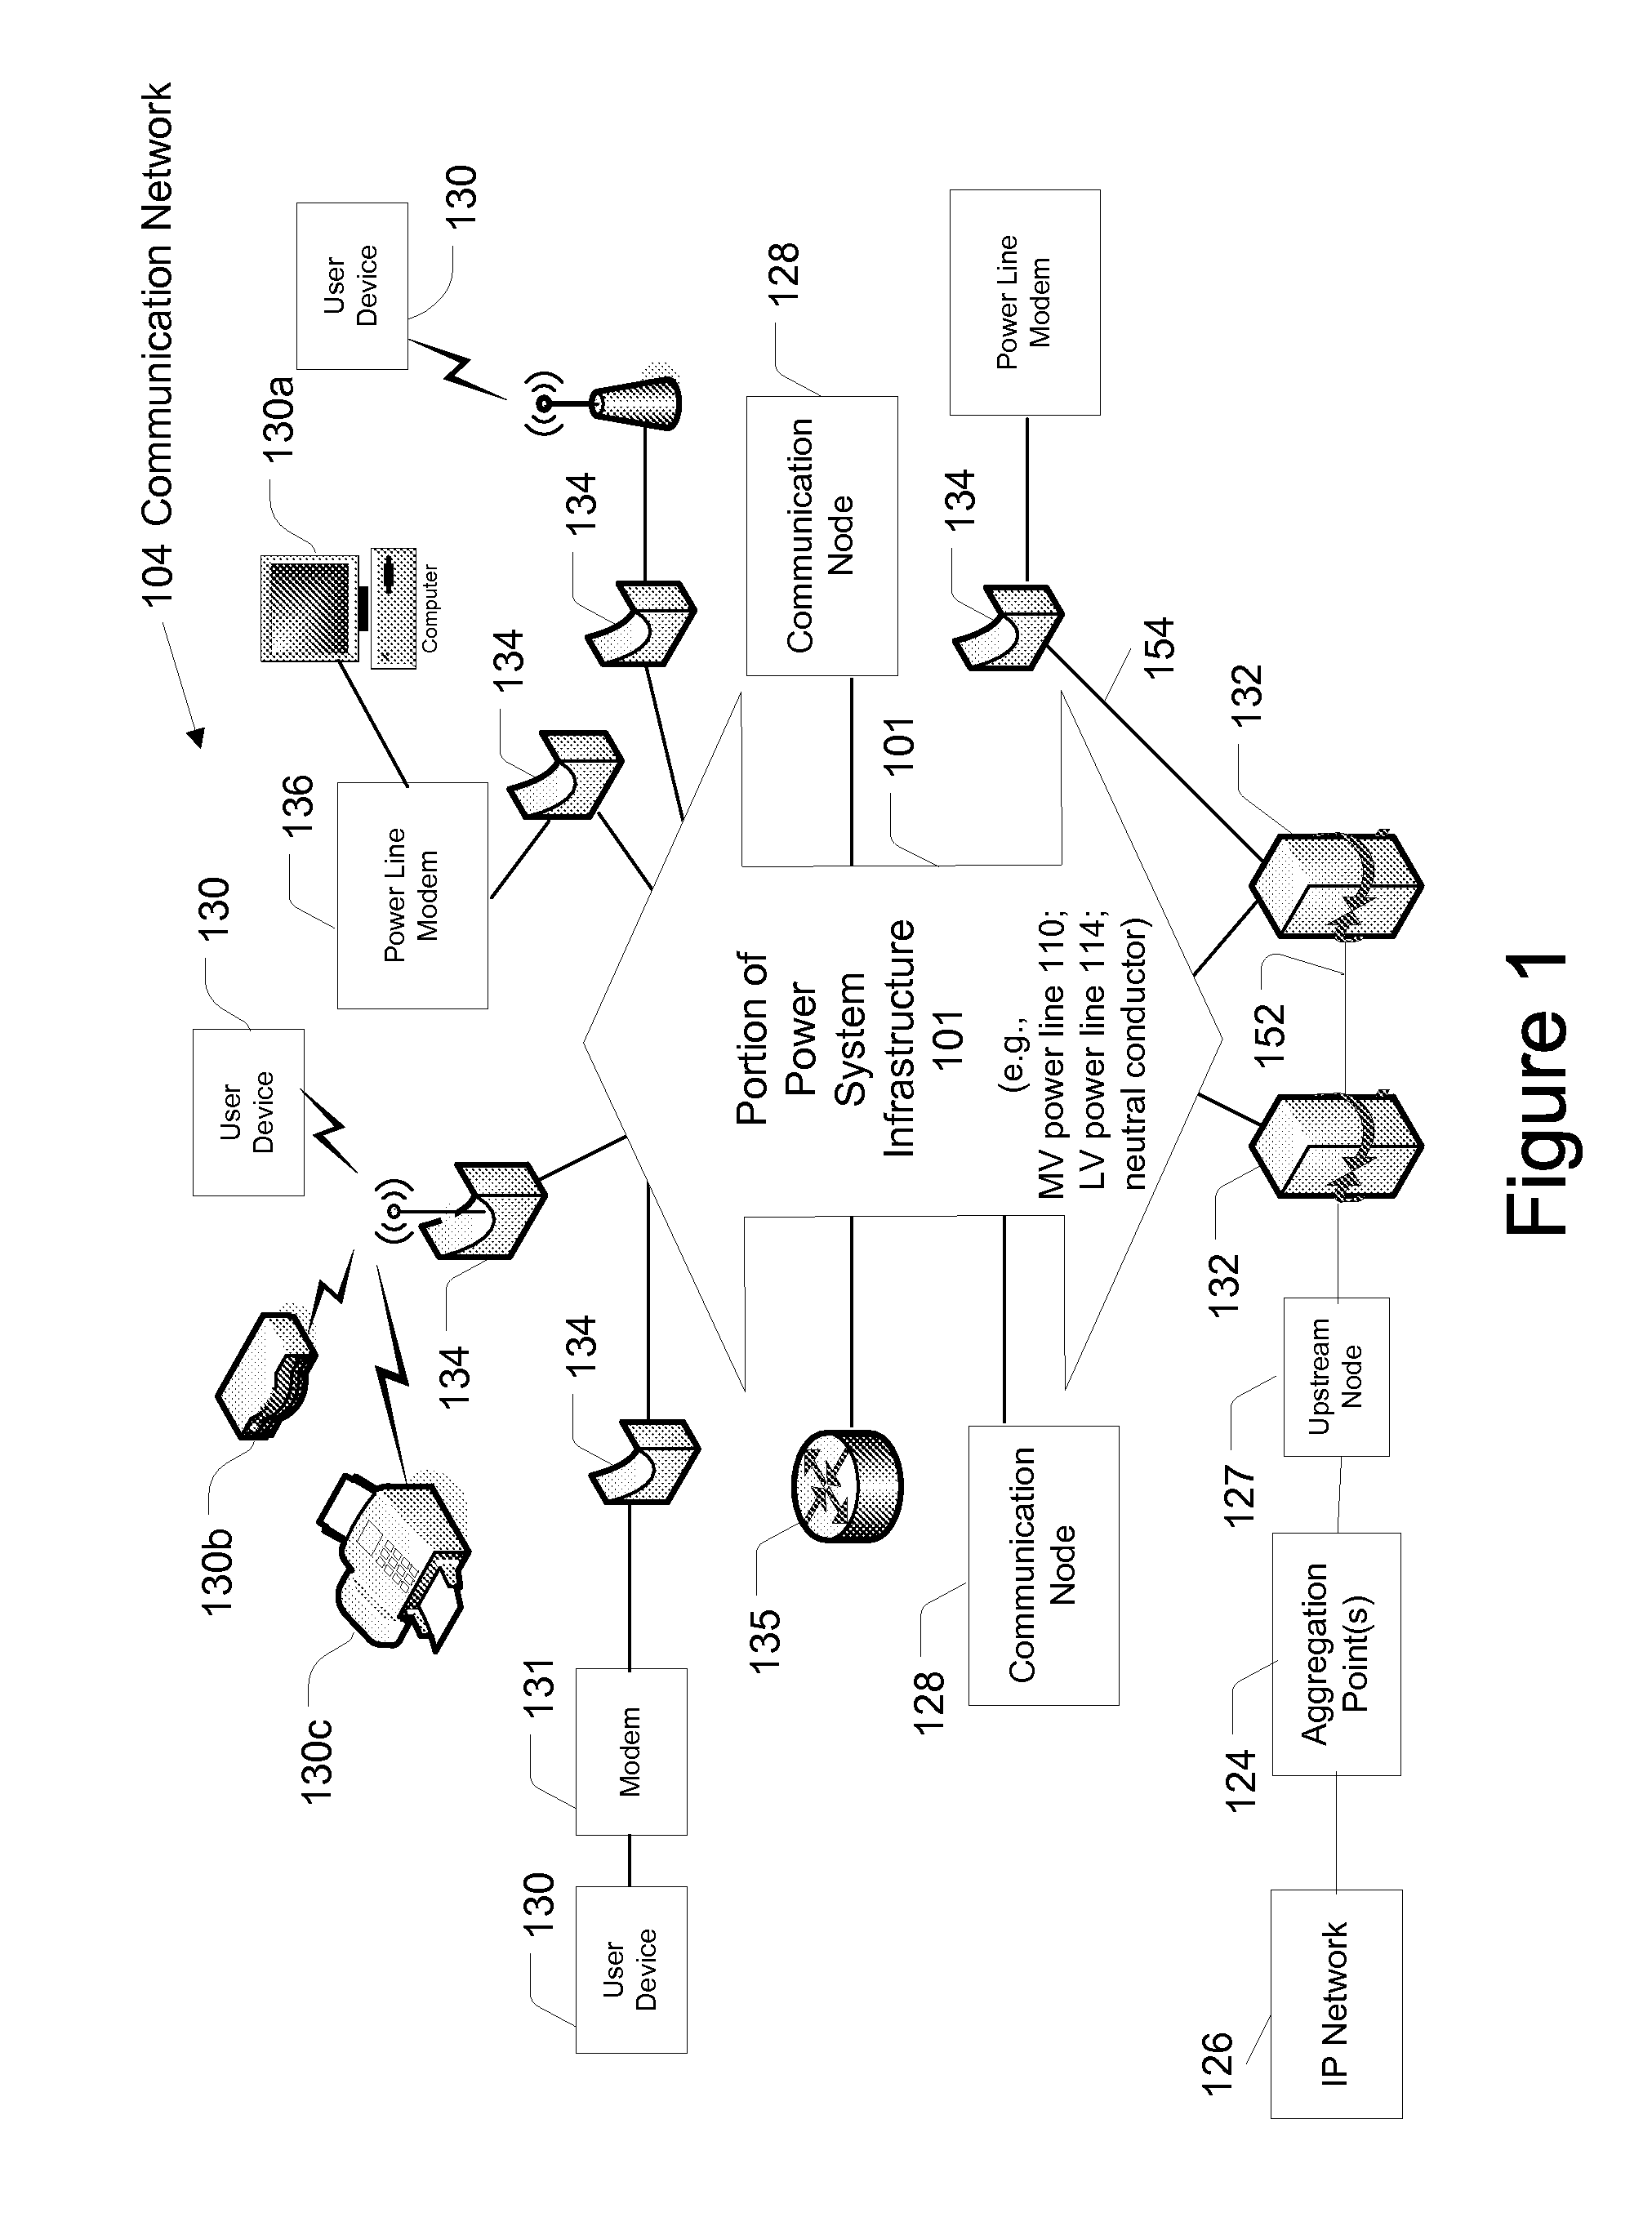 Power Line Communication Interface Device and Method